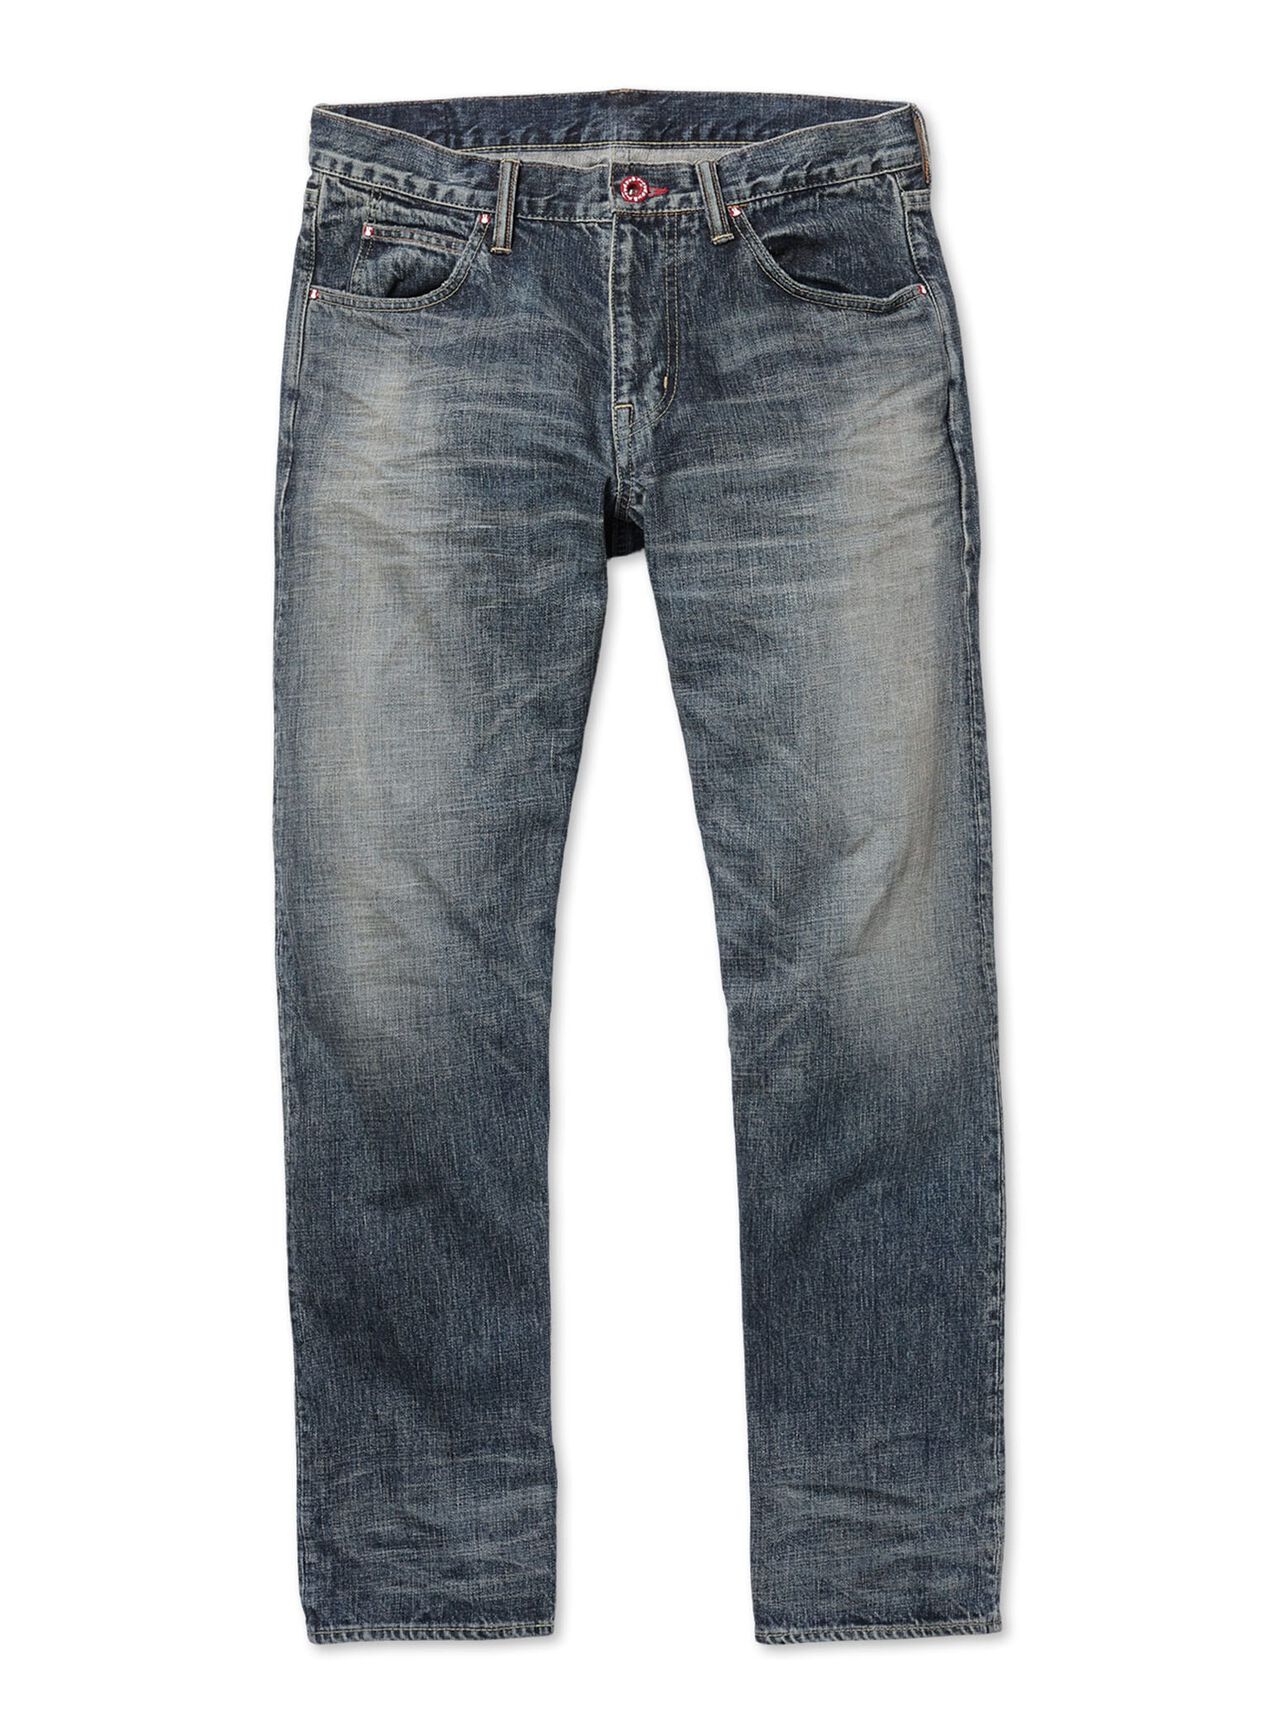 Jeans - Ordinary 22-U2 8 years,, large image number 1